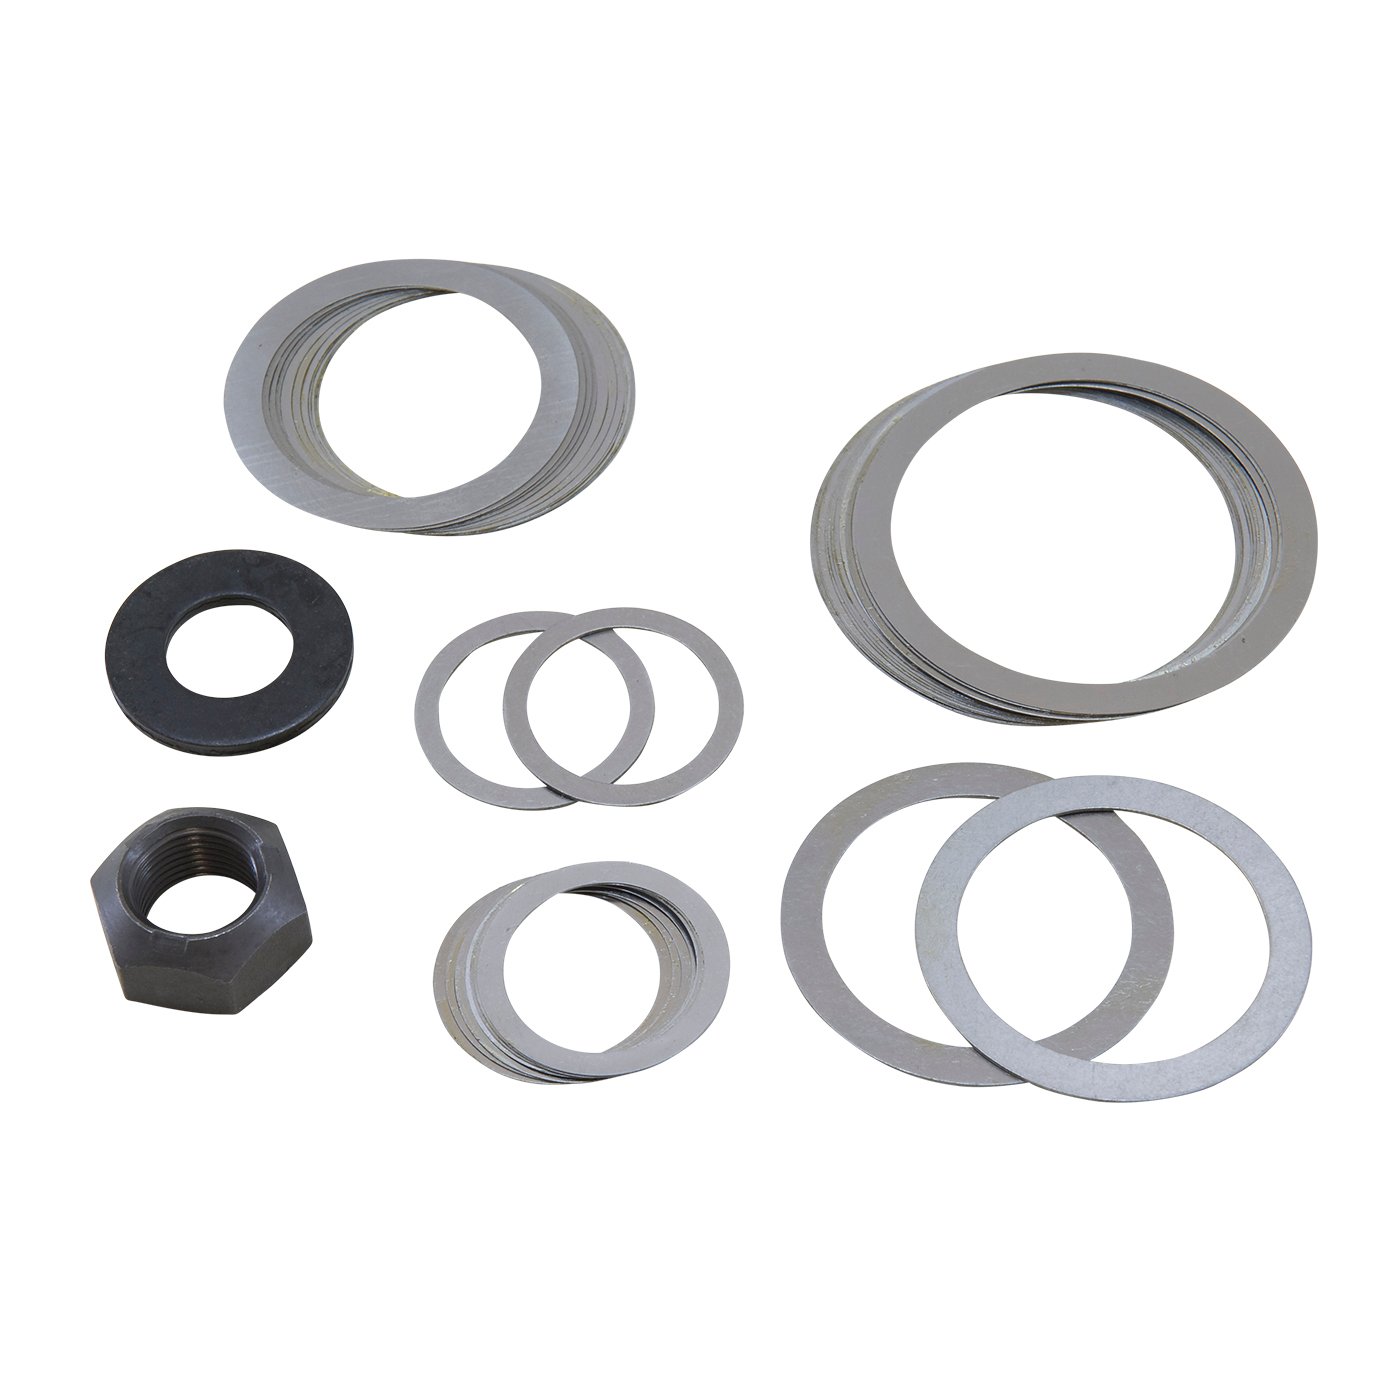 Replacement Complete Shim Kit For Dana 30 Front